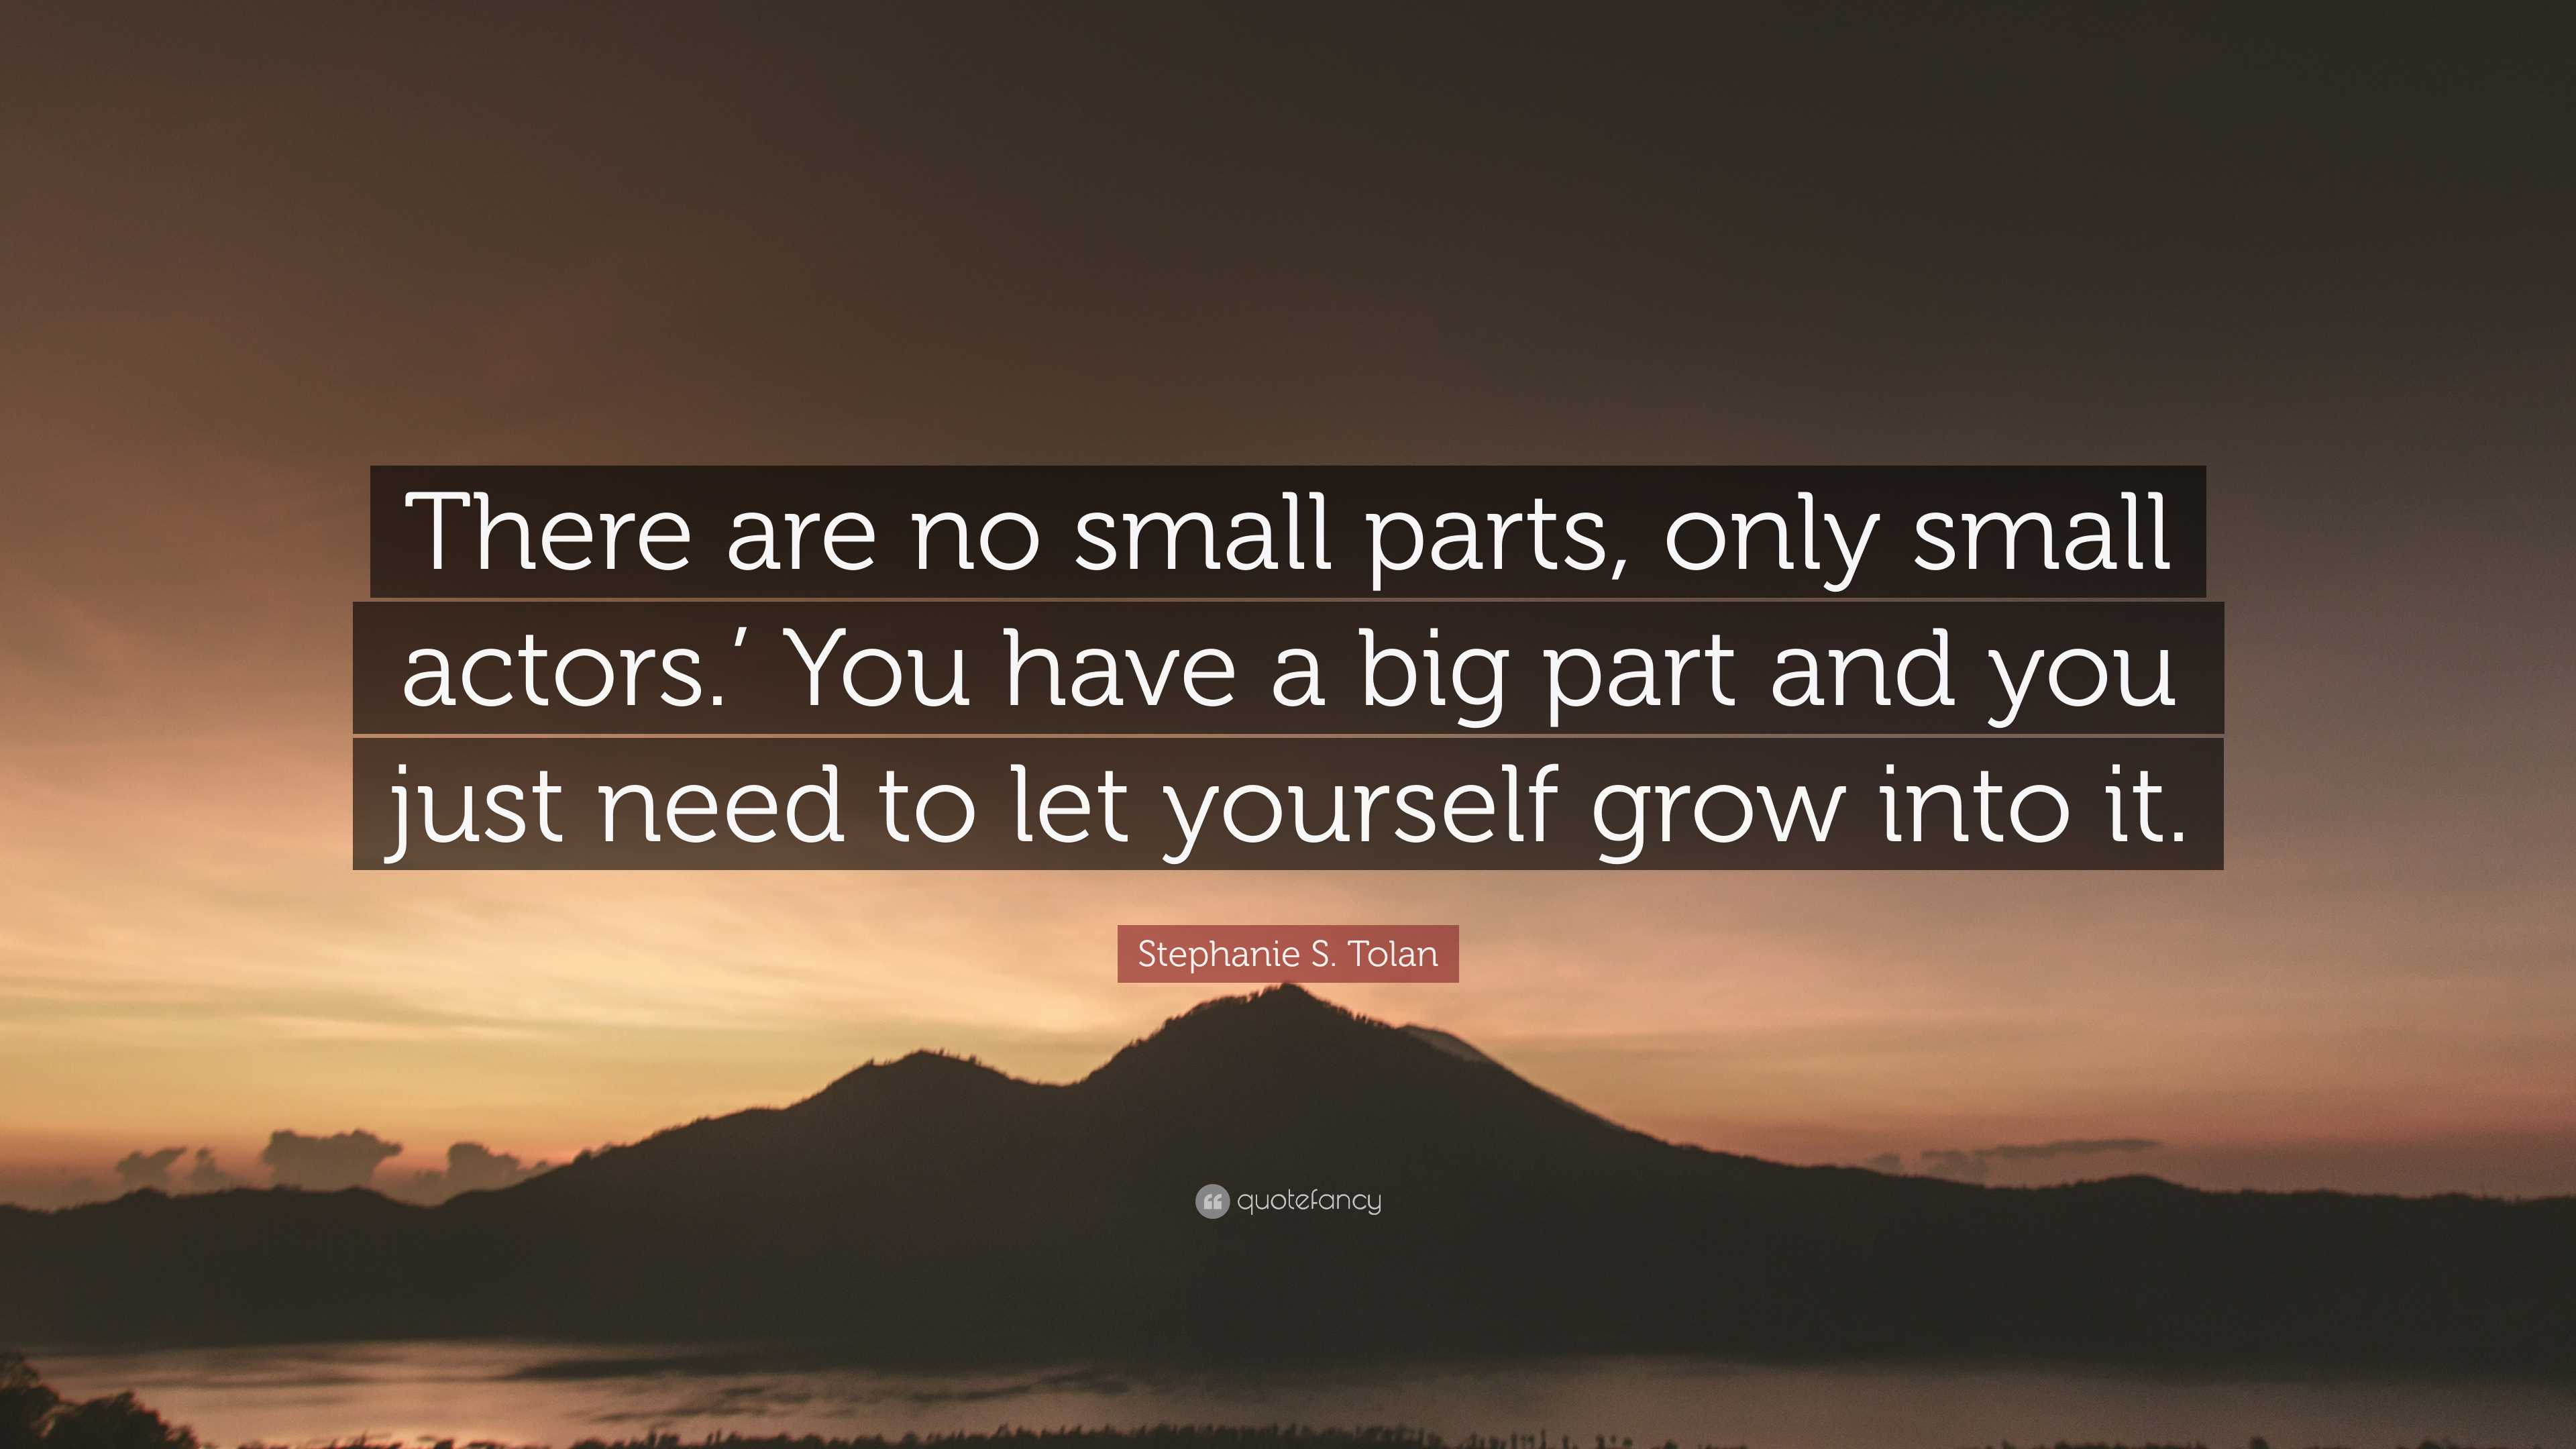 Stephanie S Tolan Quote “there Are No Small Parts Only Small Actors You Have A Big Part And 